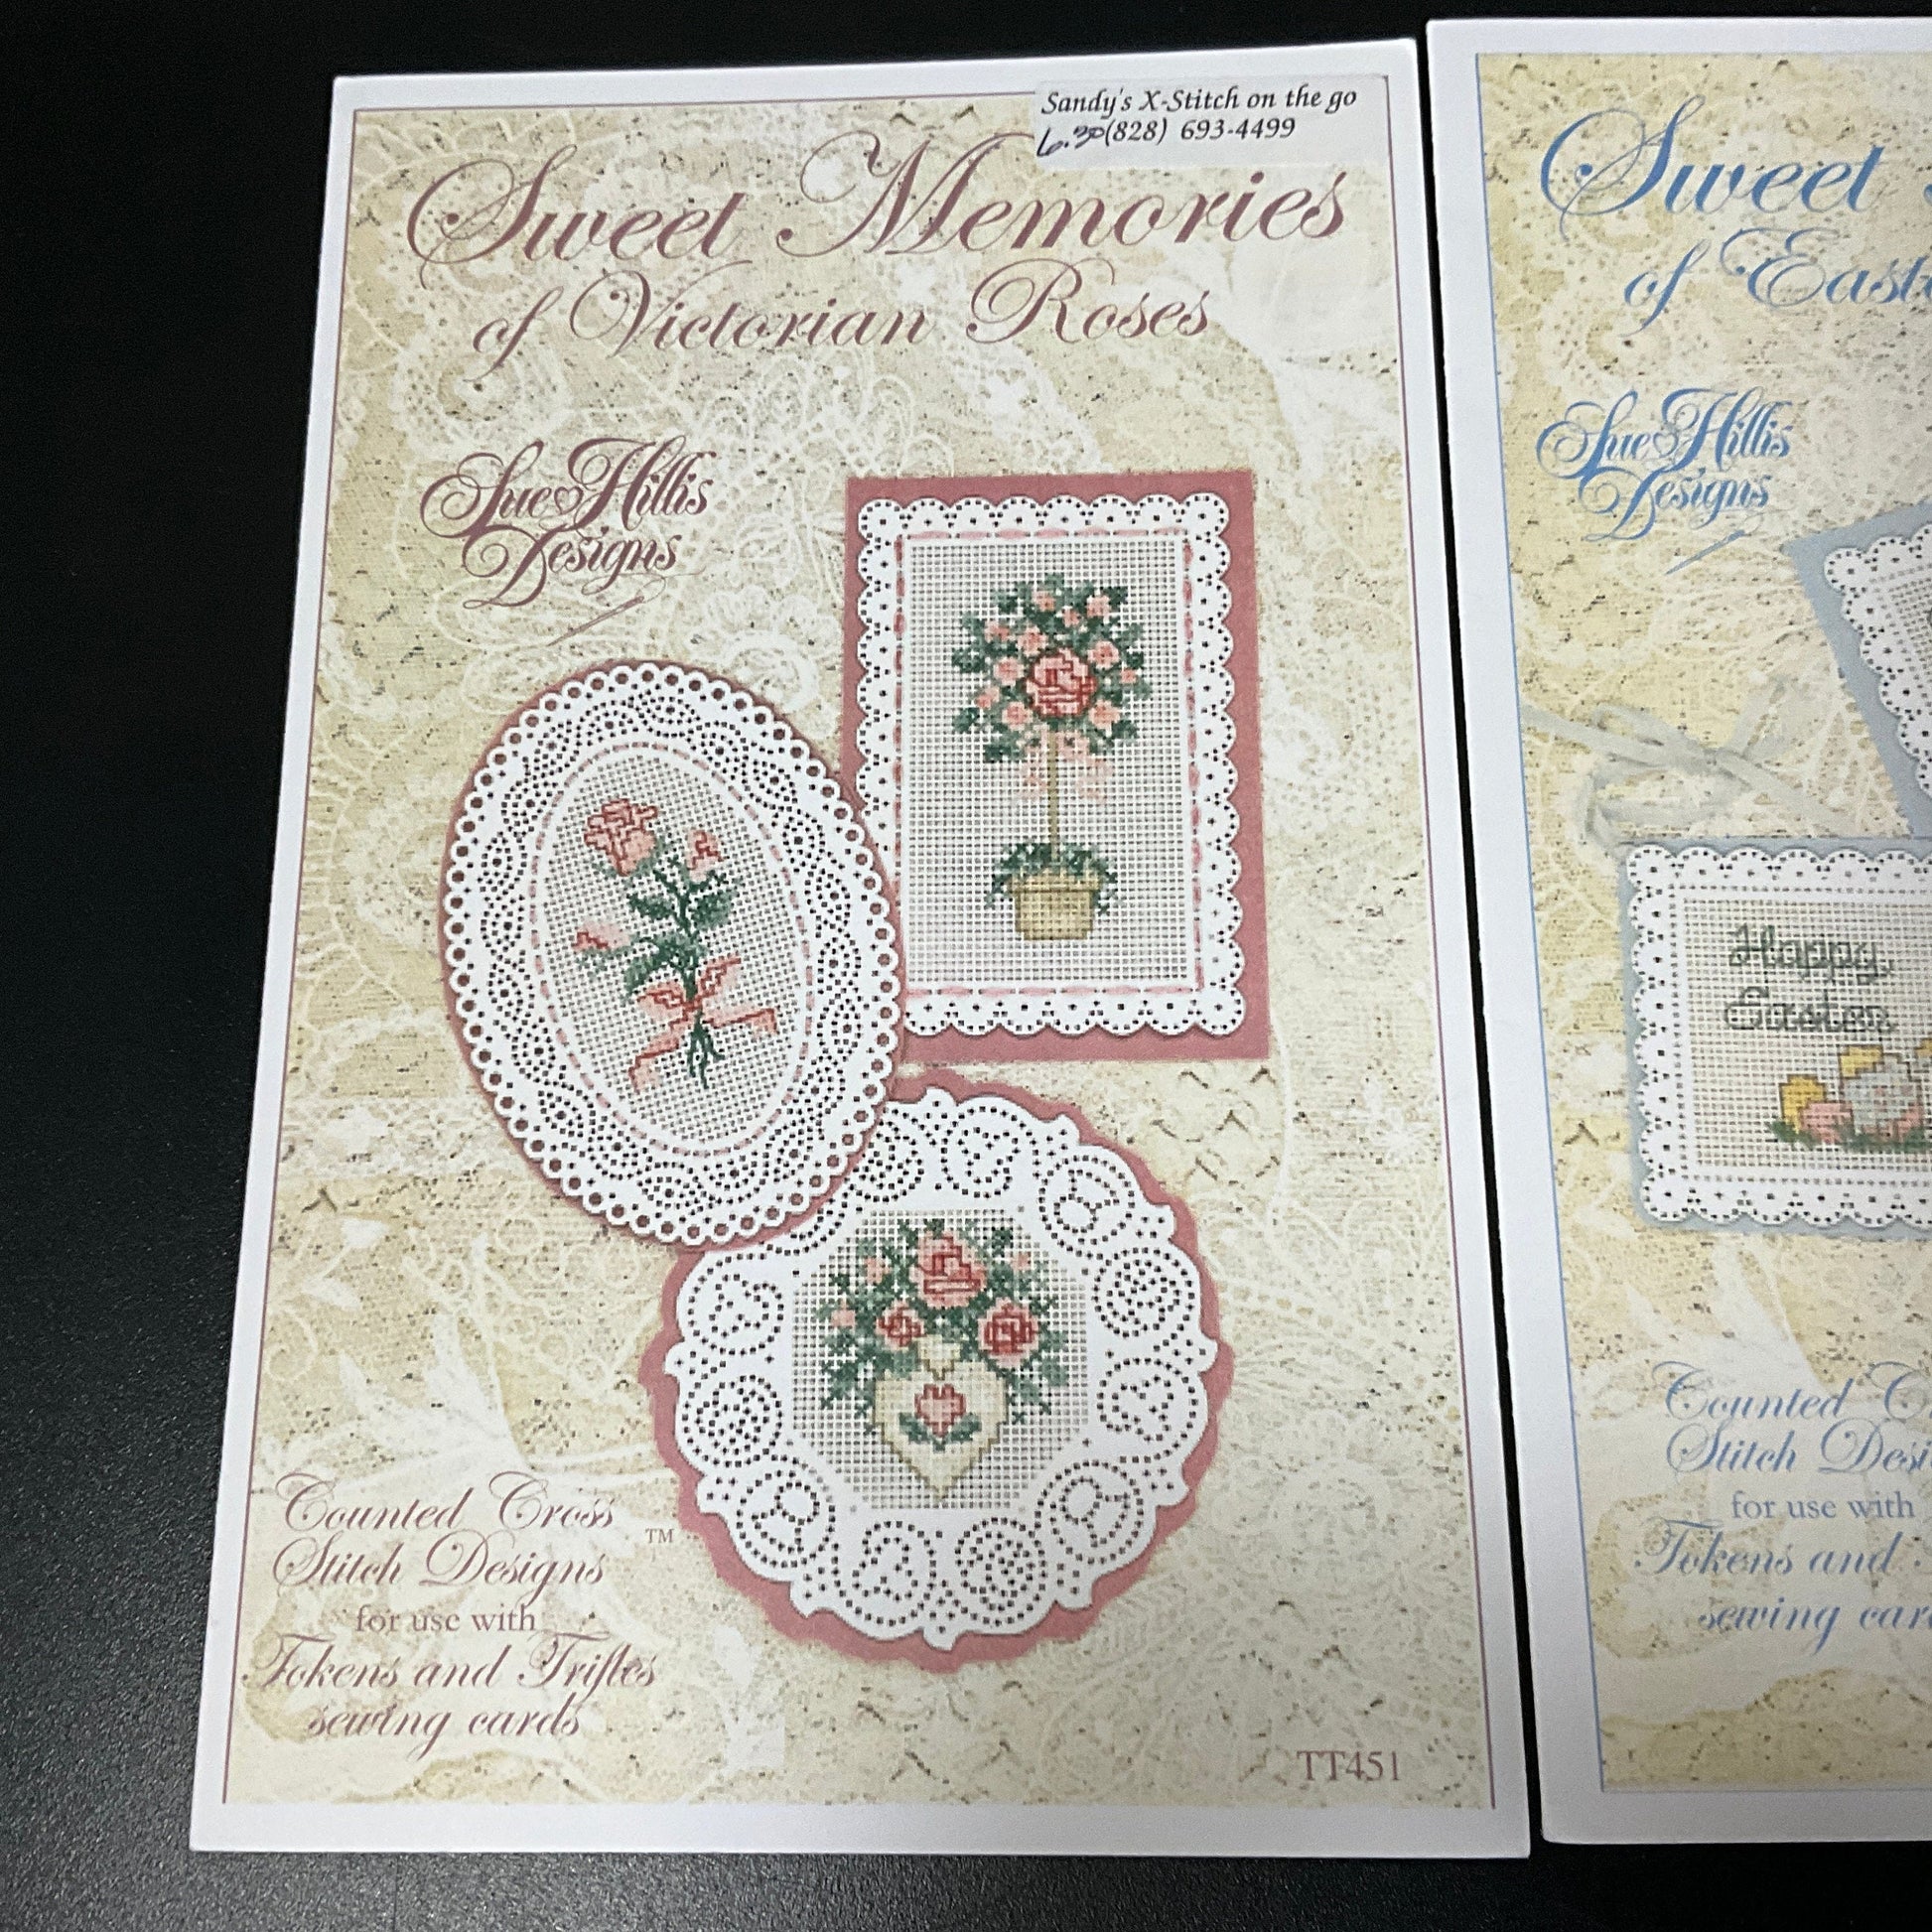 Sue Hillis Designs Sweet Memories of Victorian Roses & Easter Greetings set of 2 vintage cross stitch charts